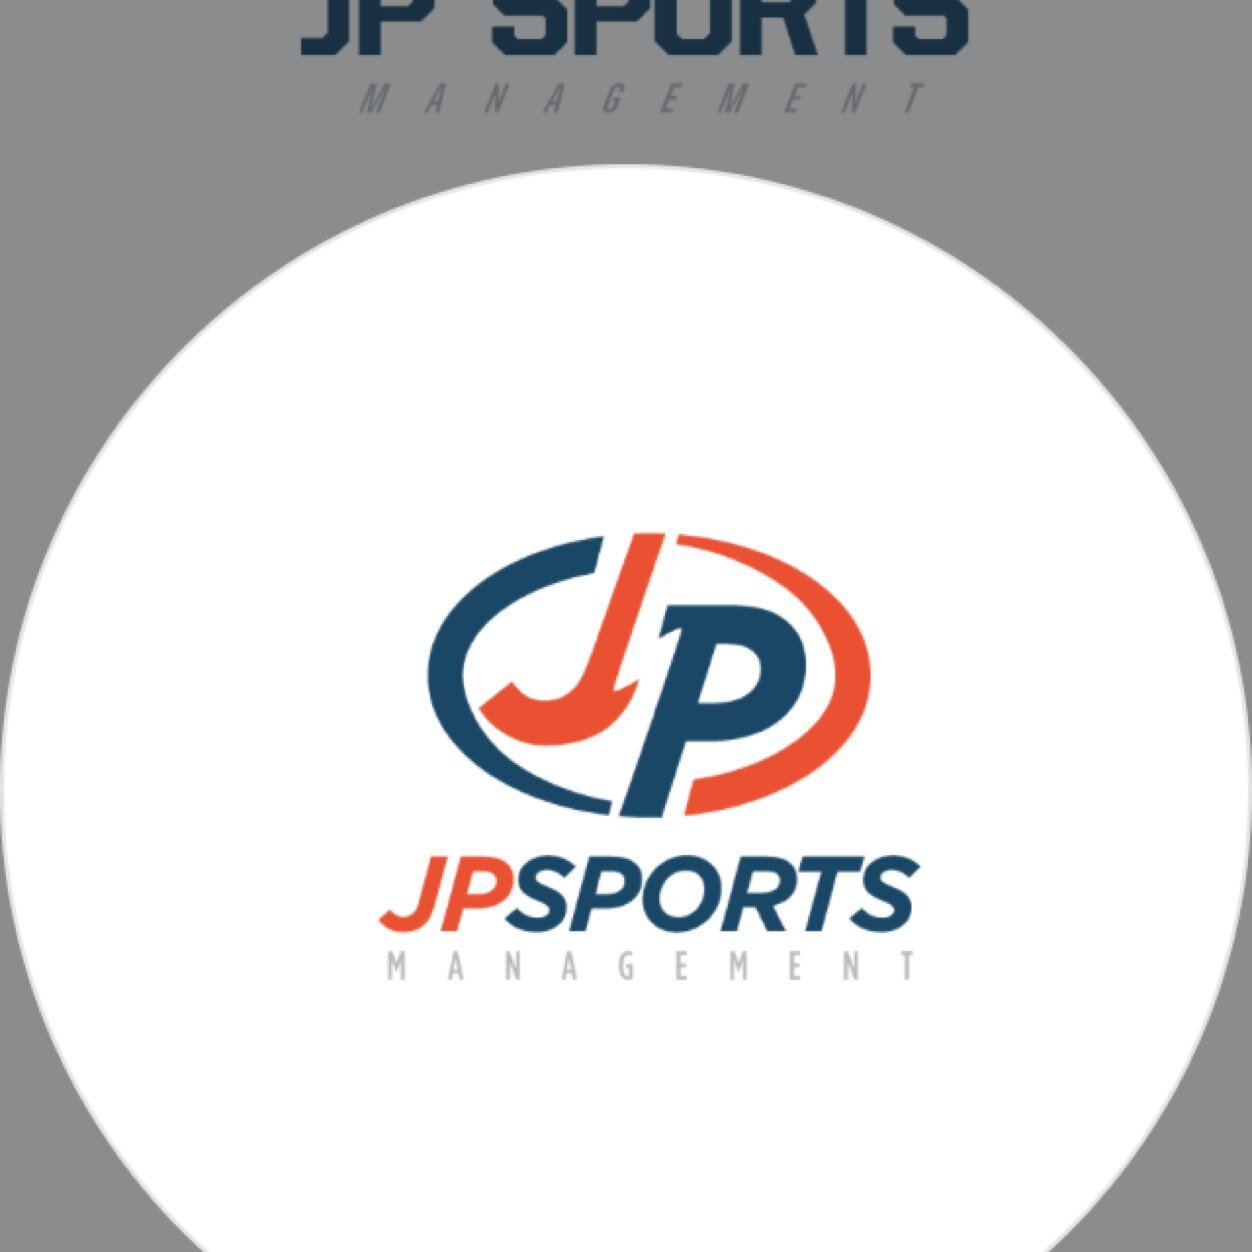 JPsportsmanagement welcome to my new page The movement